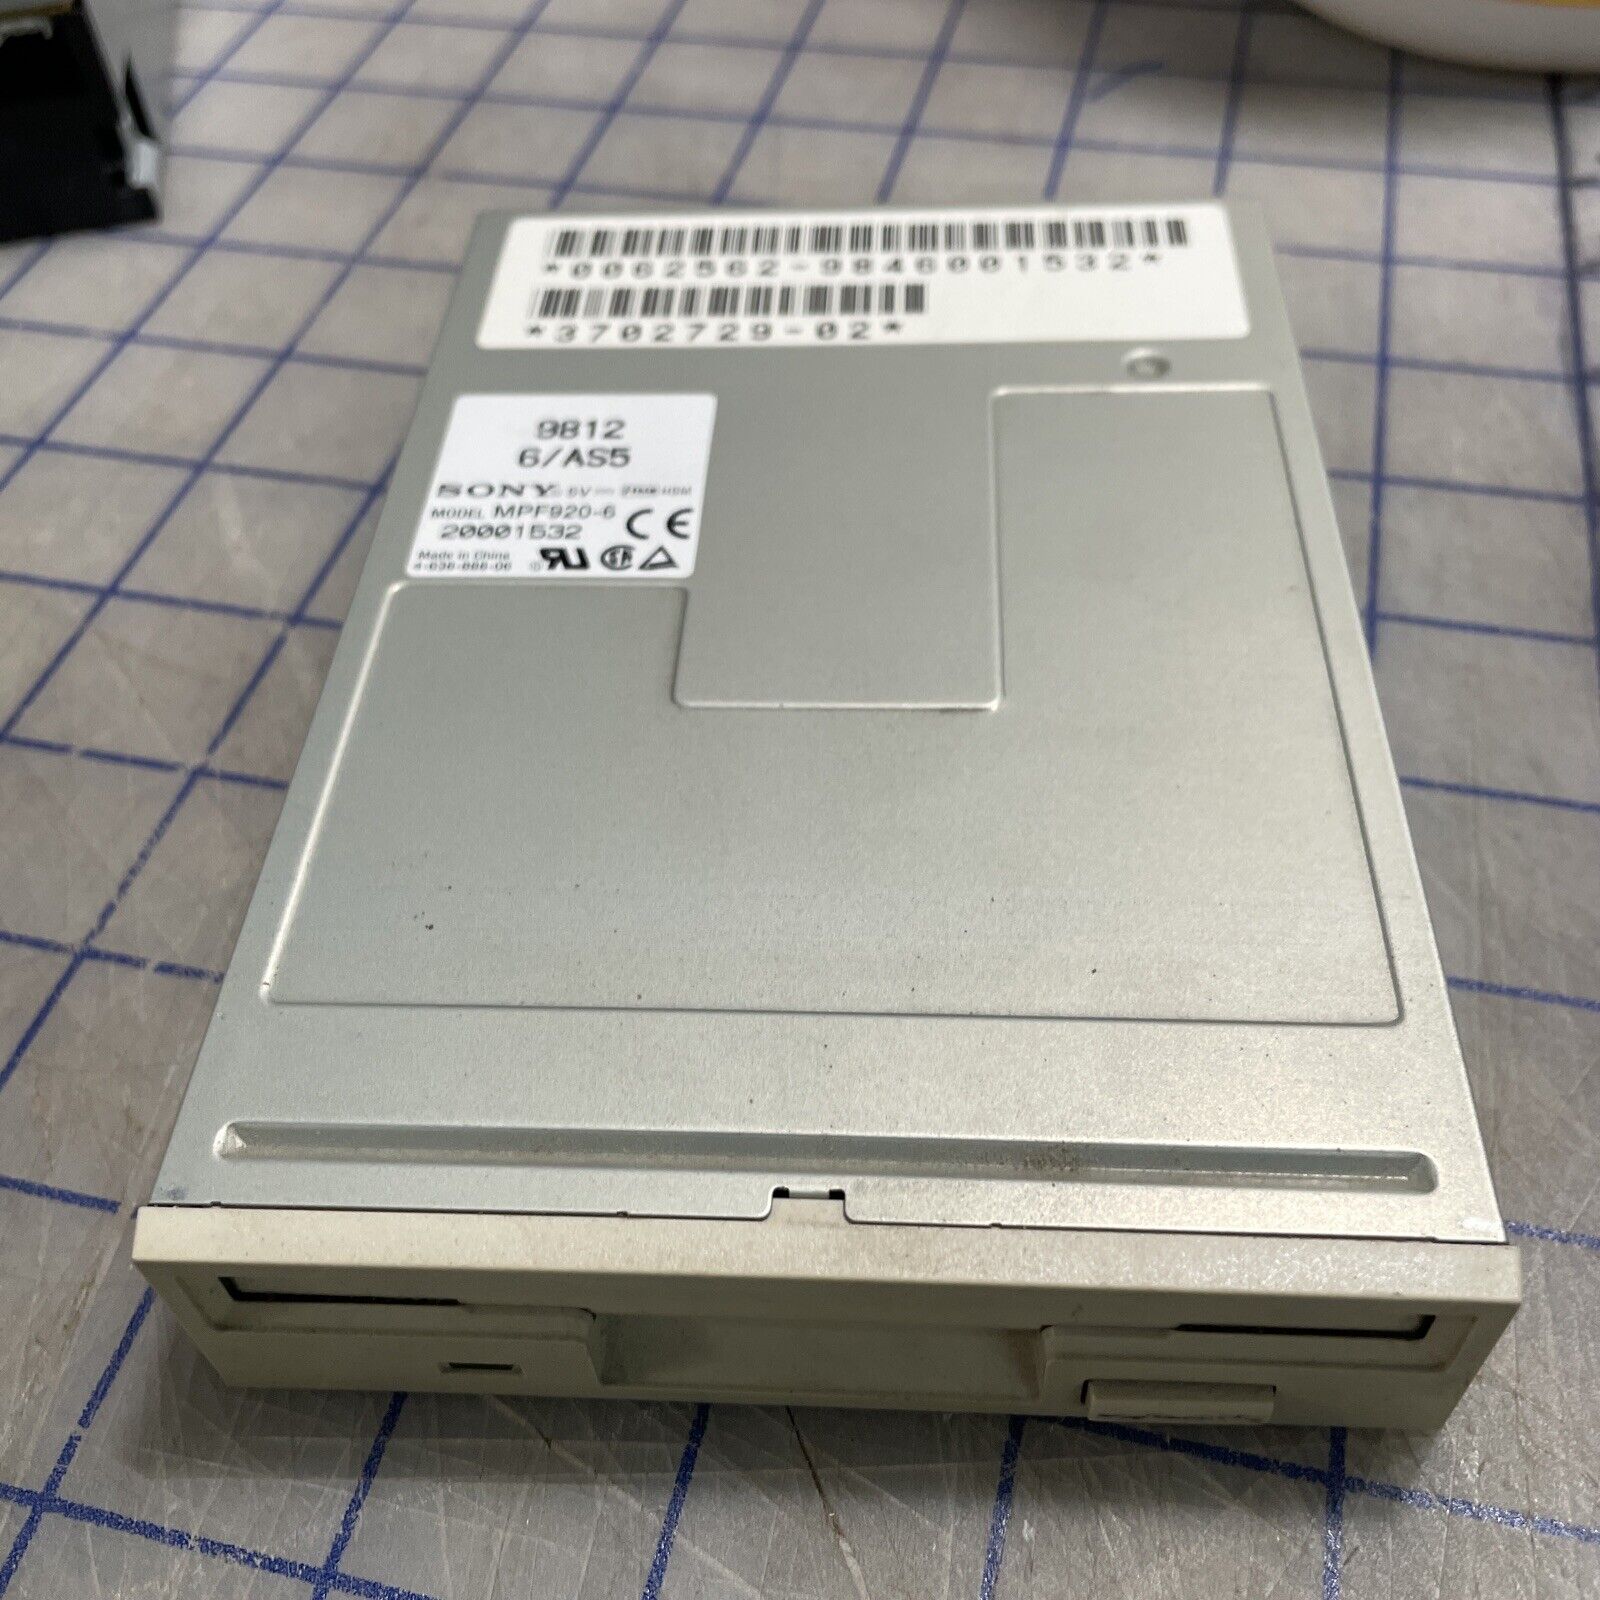 Vintage Sony MPF920-6 3.5 Floppy Drive Pulled From Sun Microsystems Ultra 30